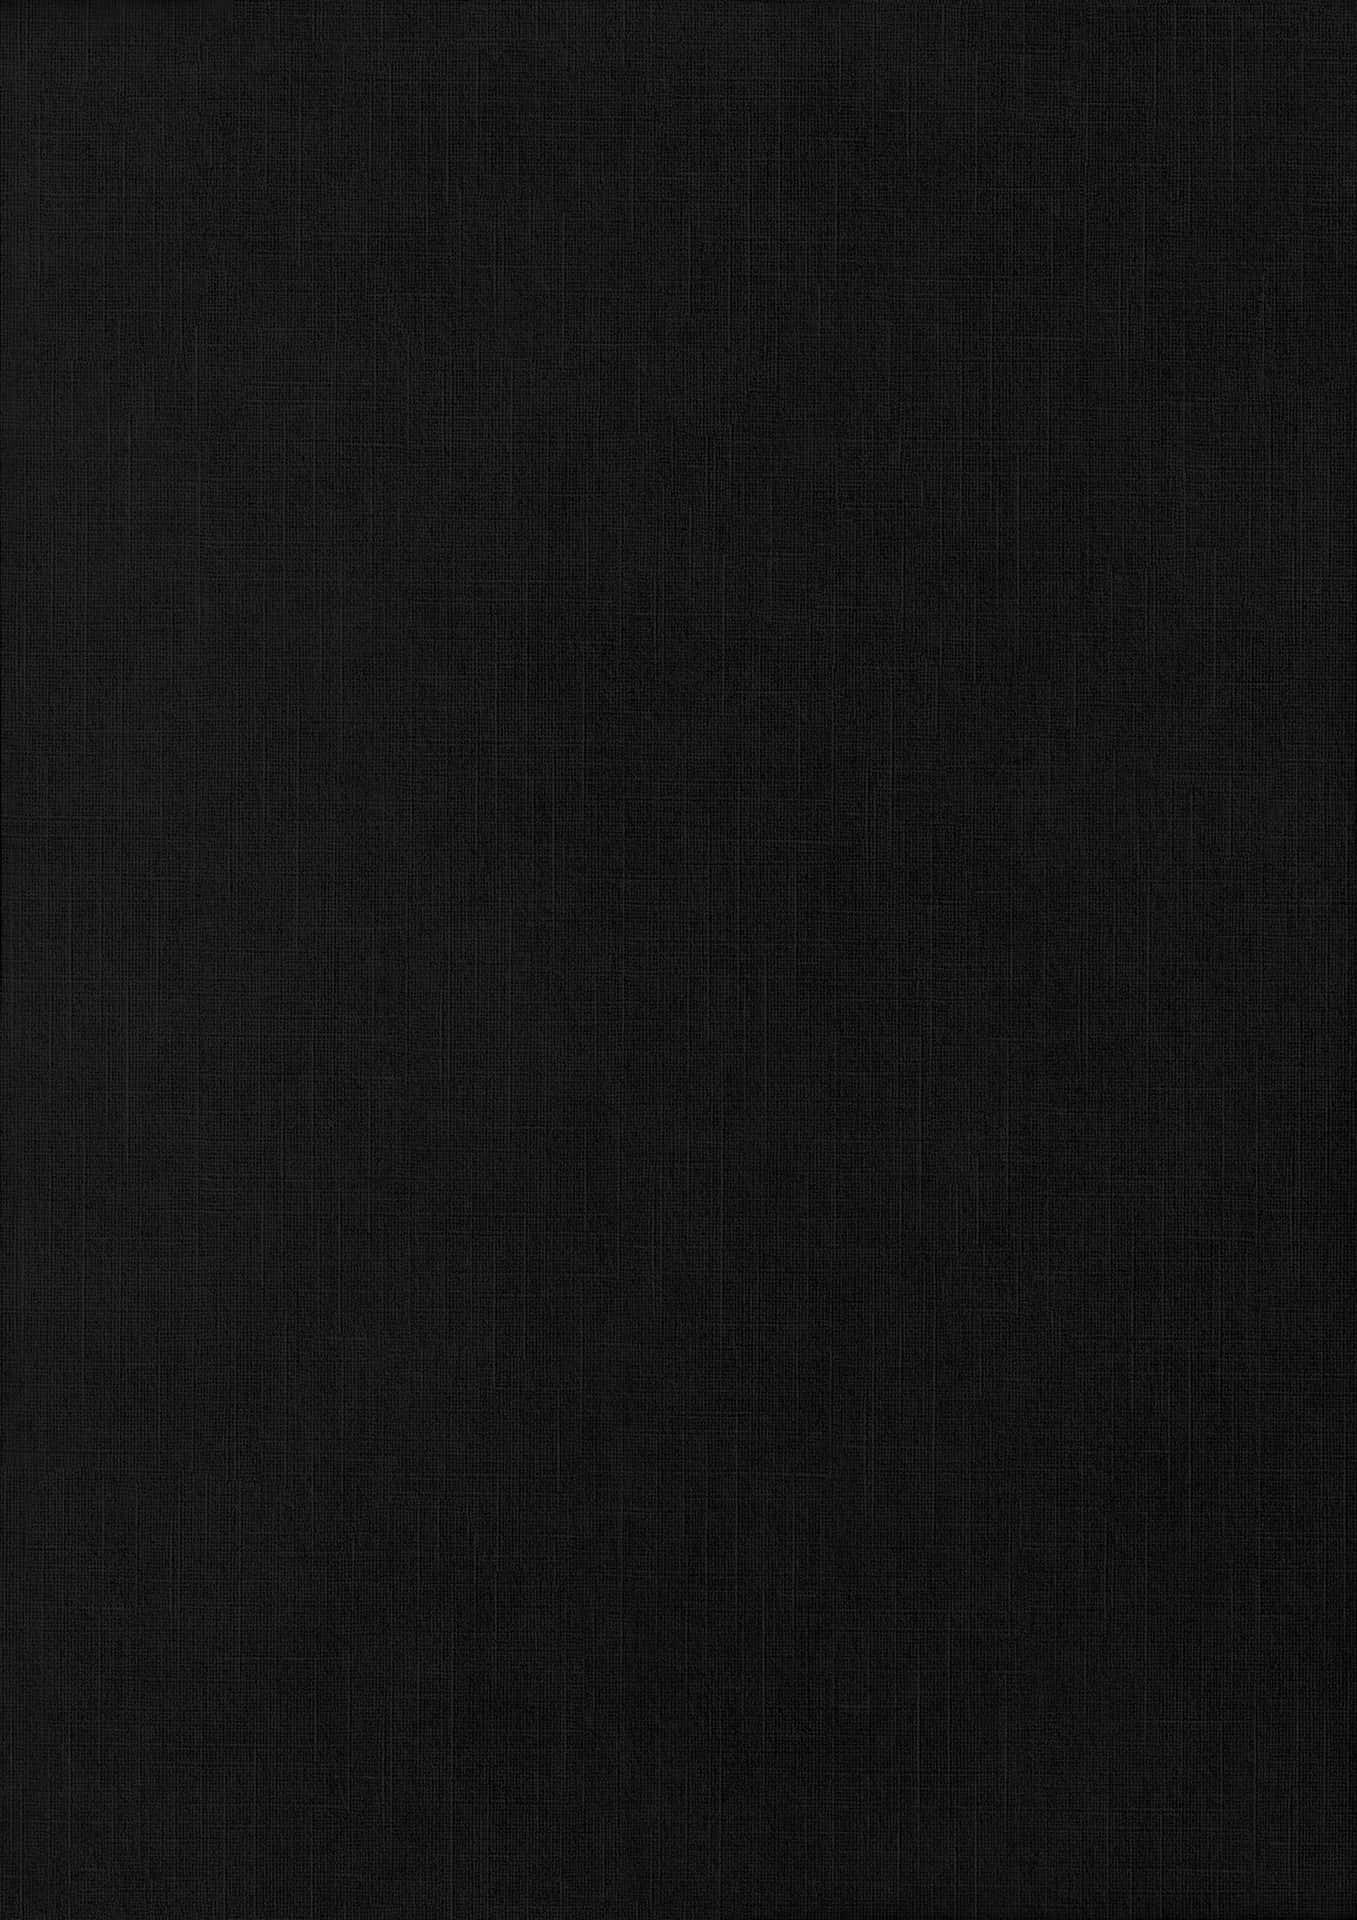 A Black Square On A White Background